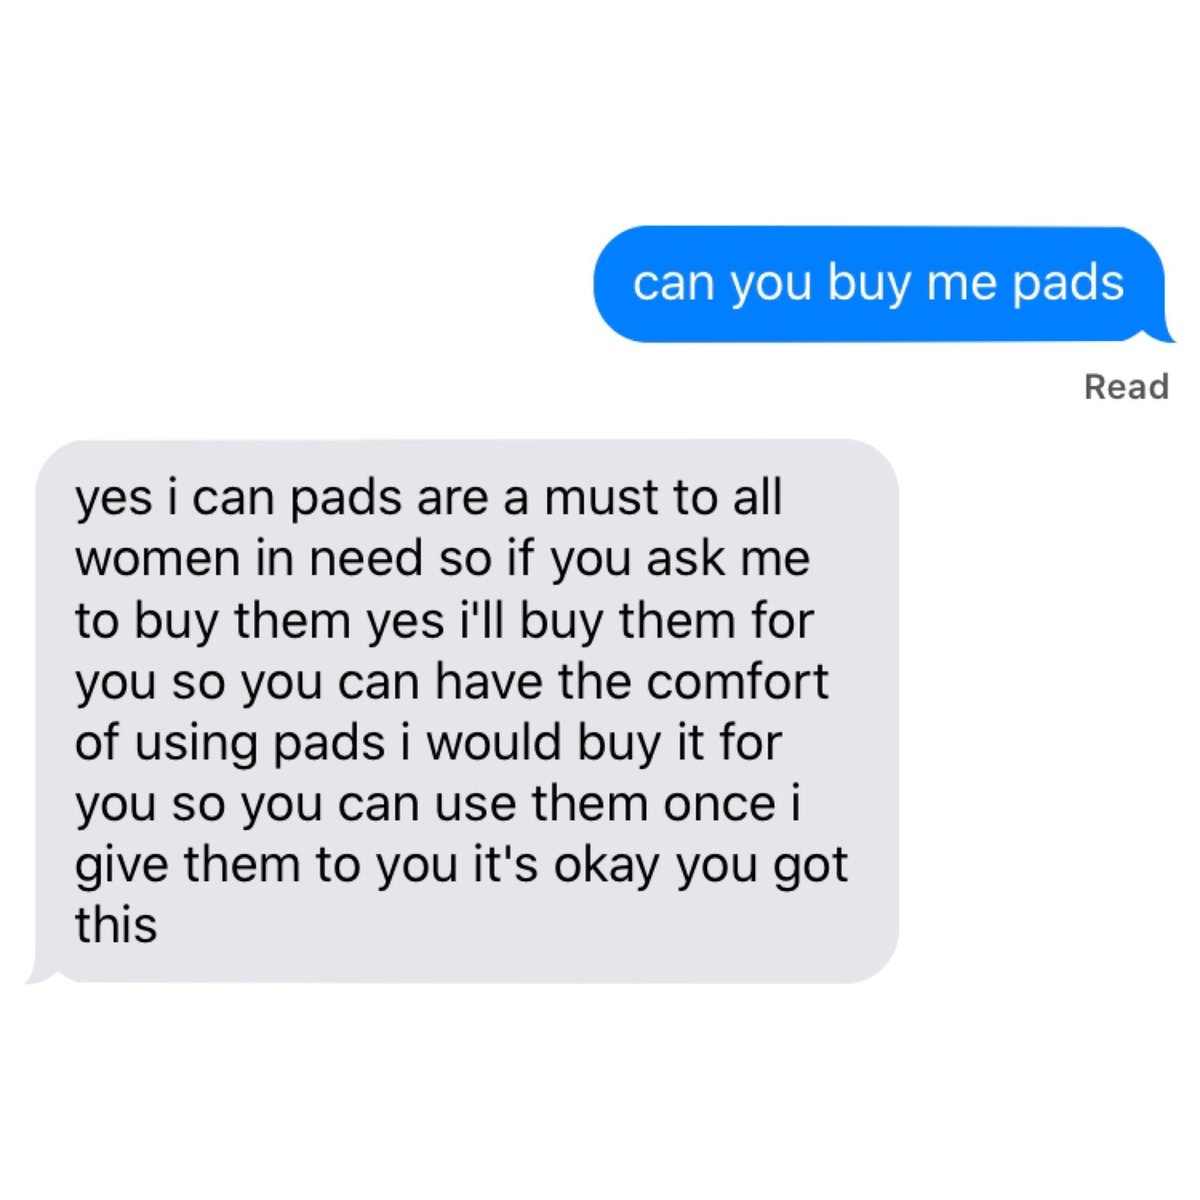 A3 Characters Responses to “Can You Buy Me Pads”: A Thread